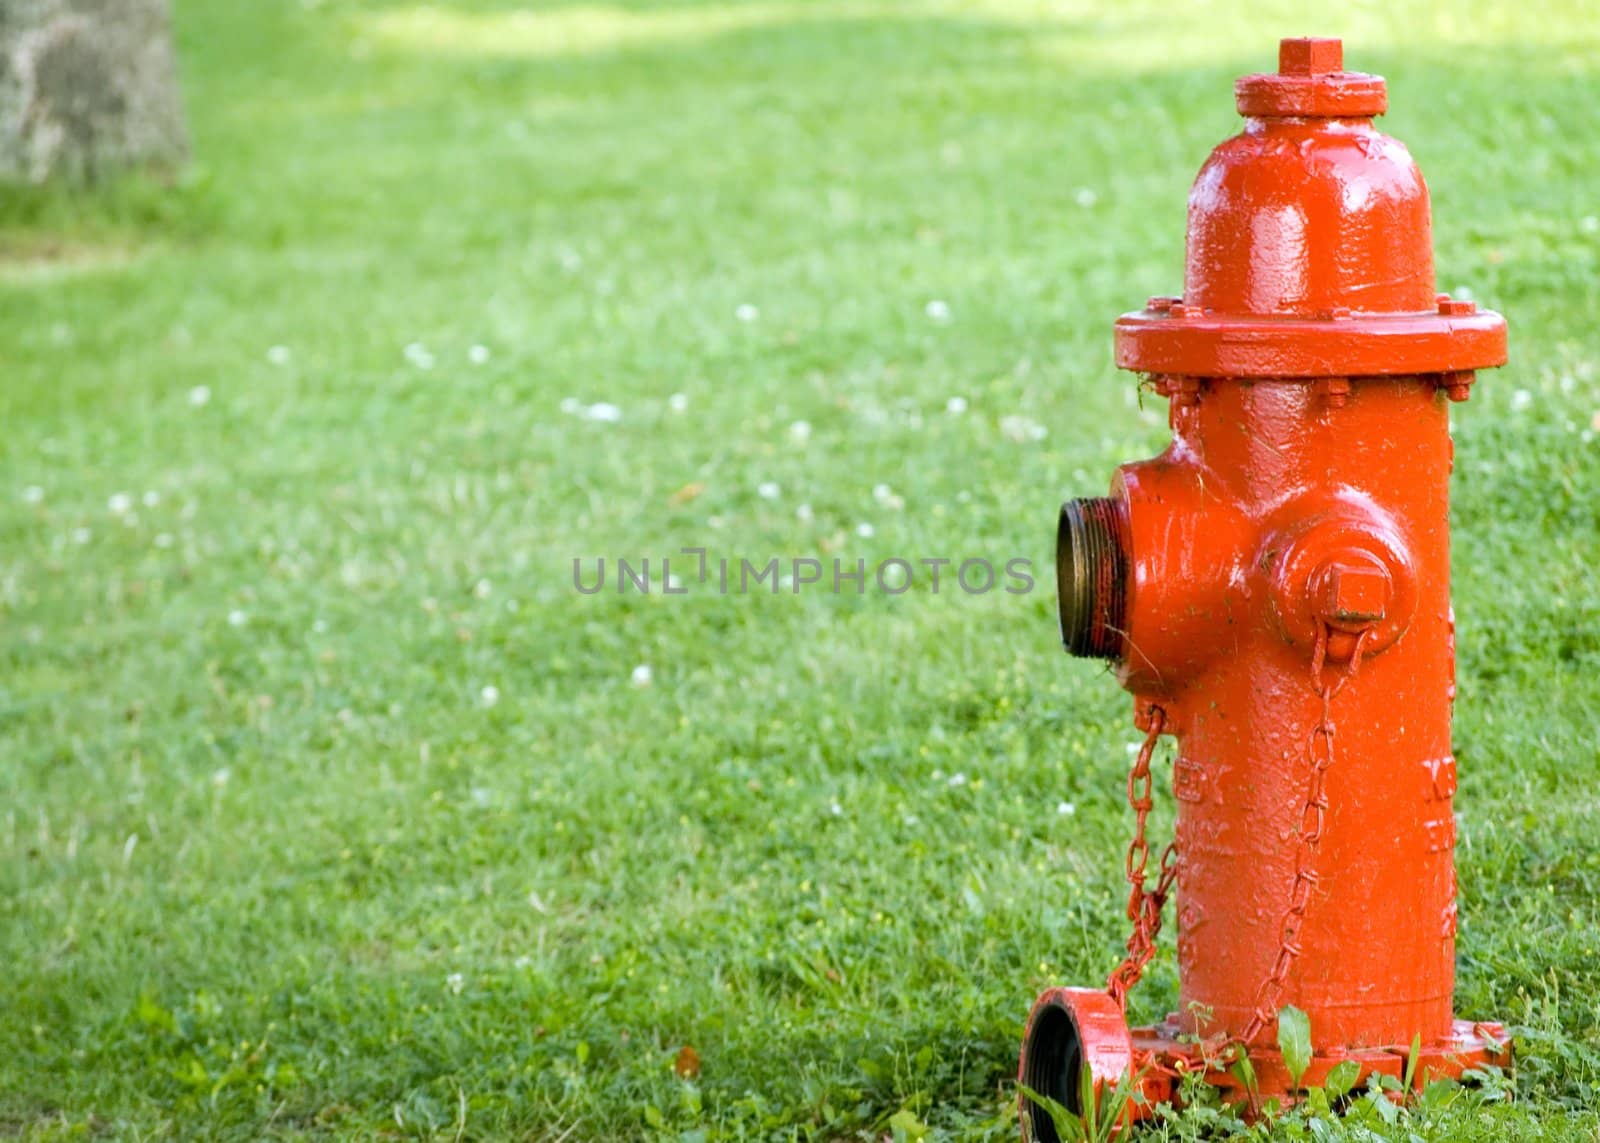 A red fire hydrant with a cap off.